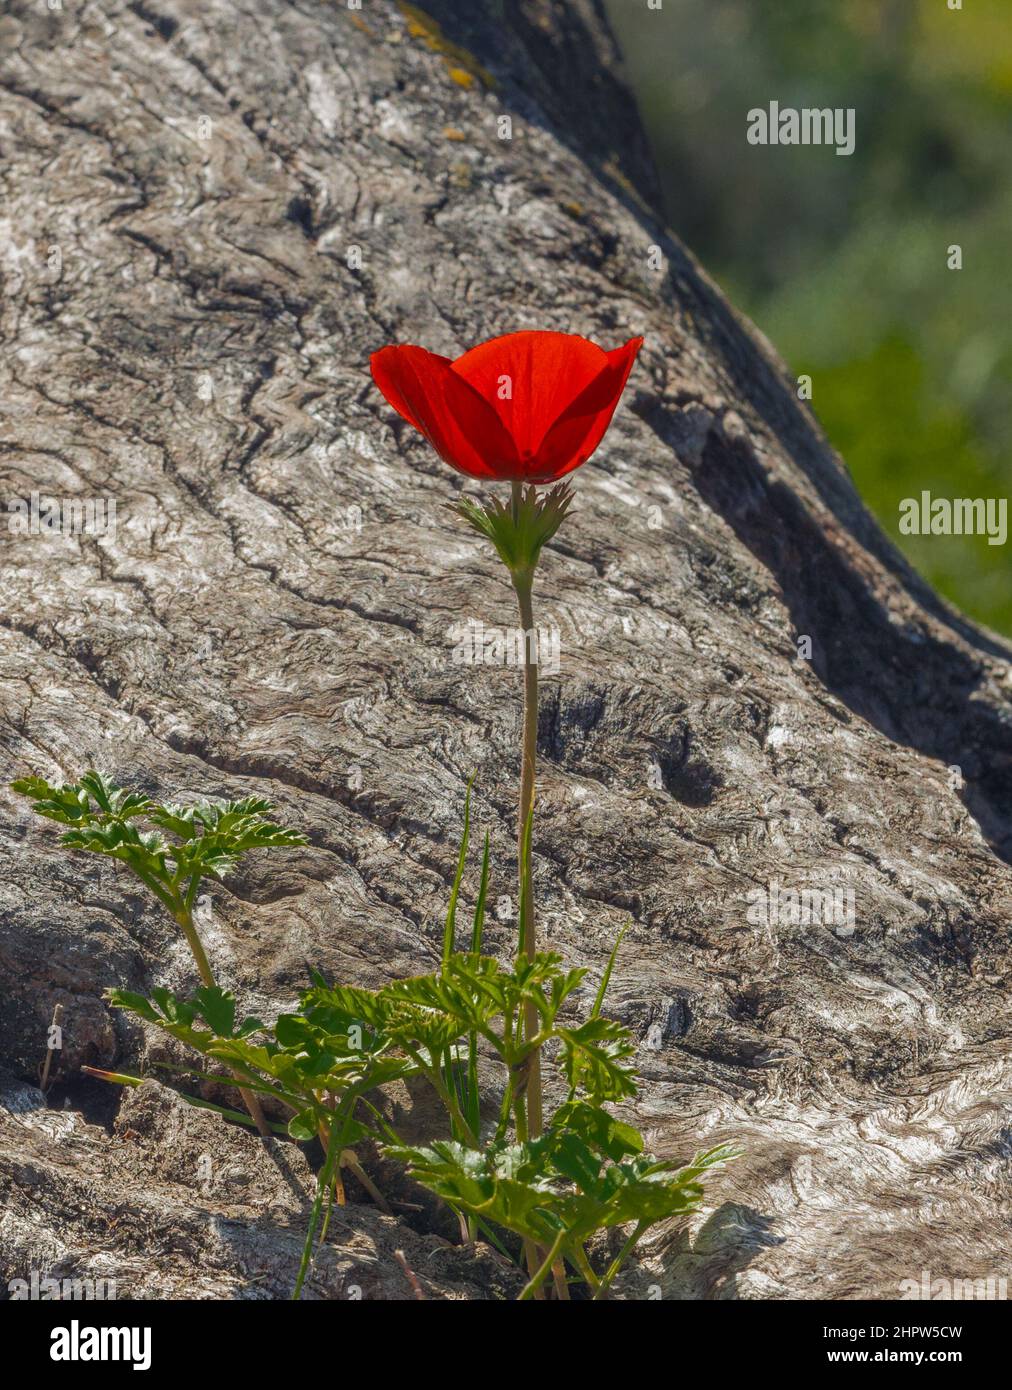 Red scarlet flower grow from an old wooden stump. Stock Photo